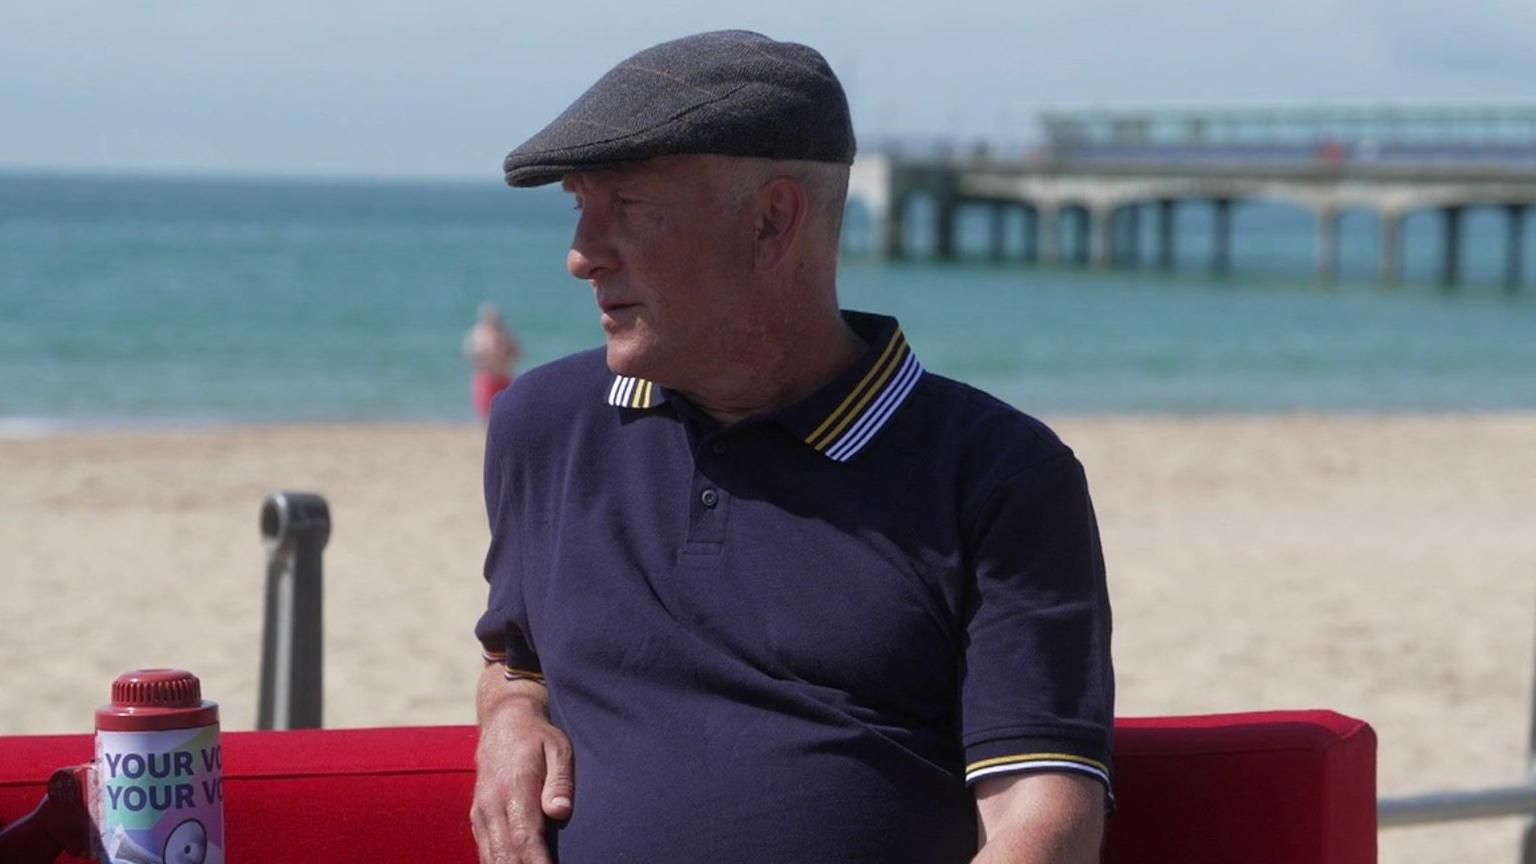 Andrew wears a dark blue polo shirt with a grey, checked hat and is sitting on a red sofa with Bournemouth beach behind him